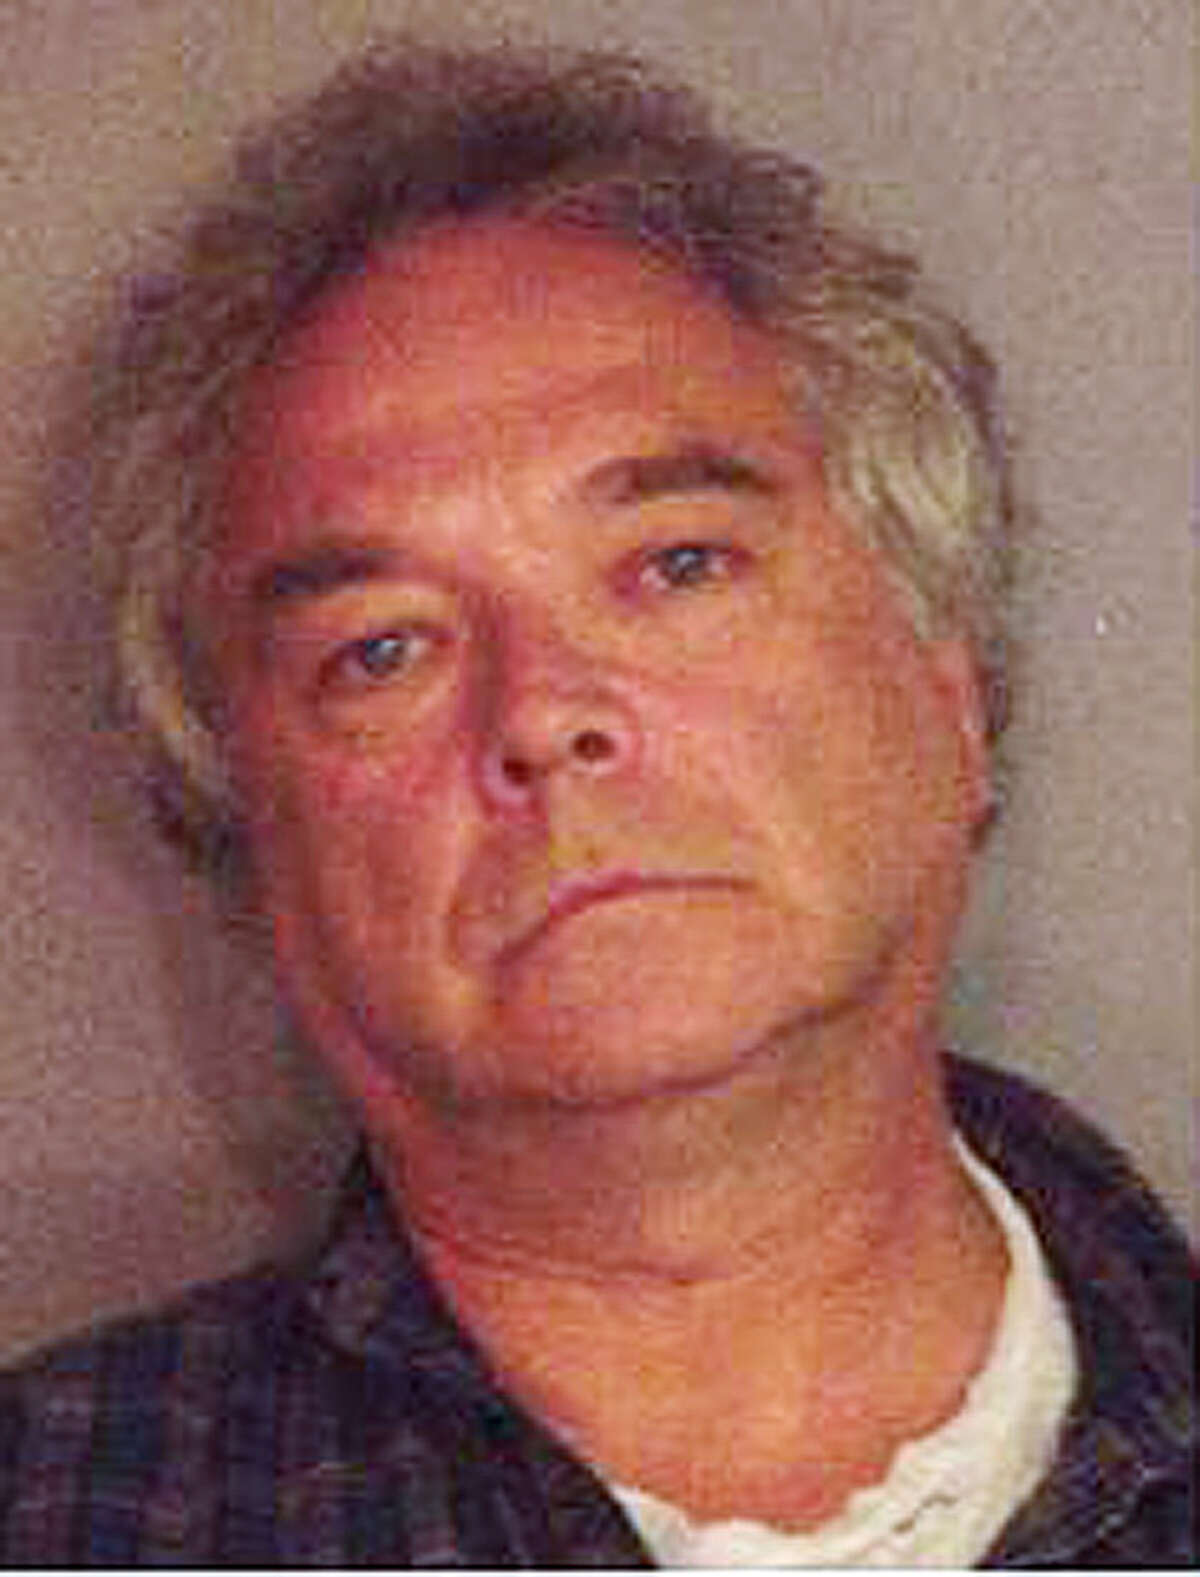 Charles Keegan, age 58 of Bethlehem was arrested on July 15 for Stalking and other charges.